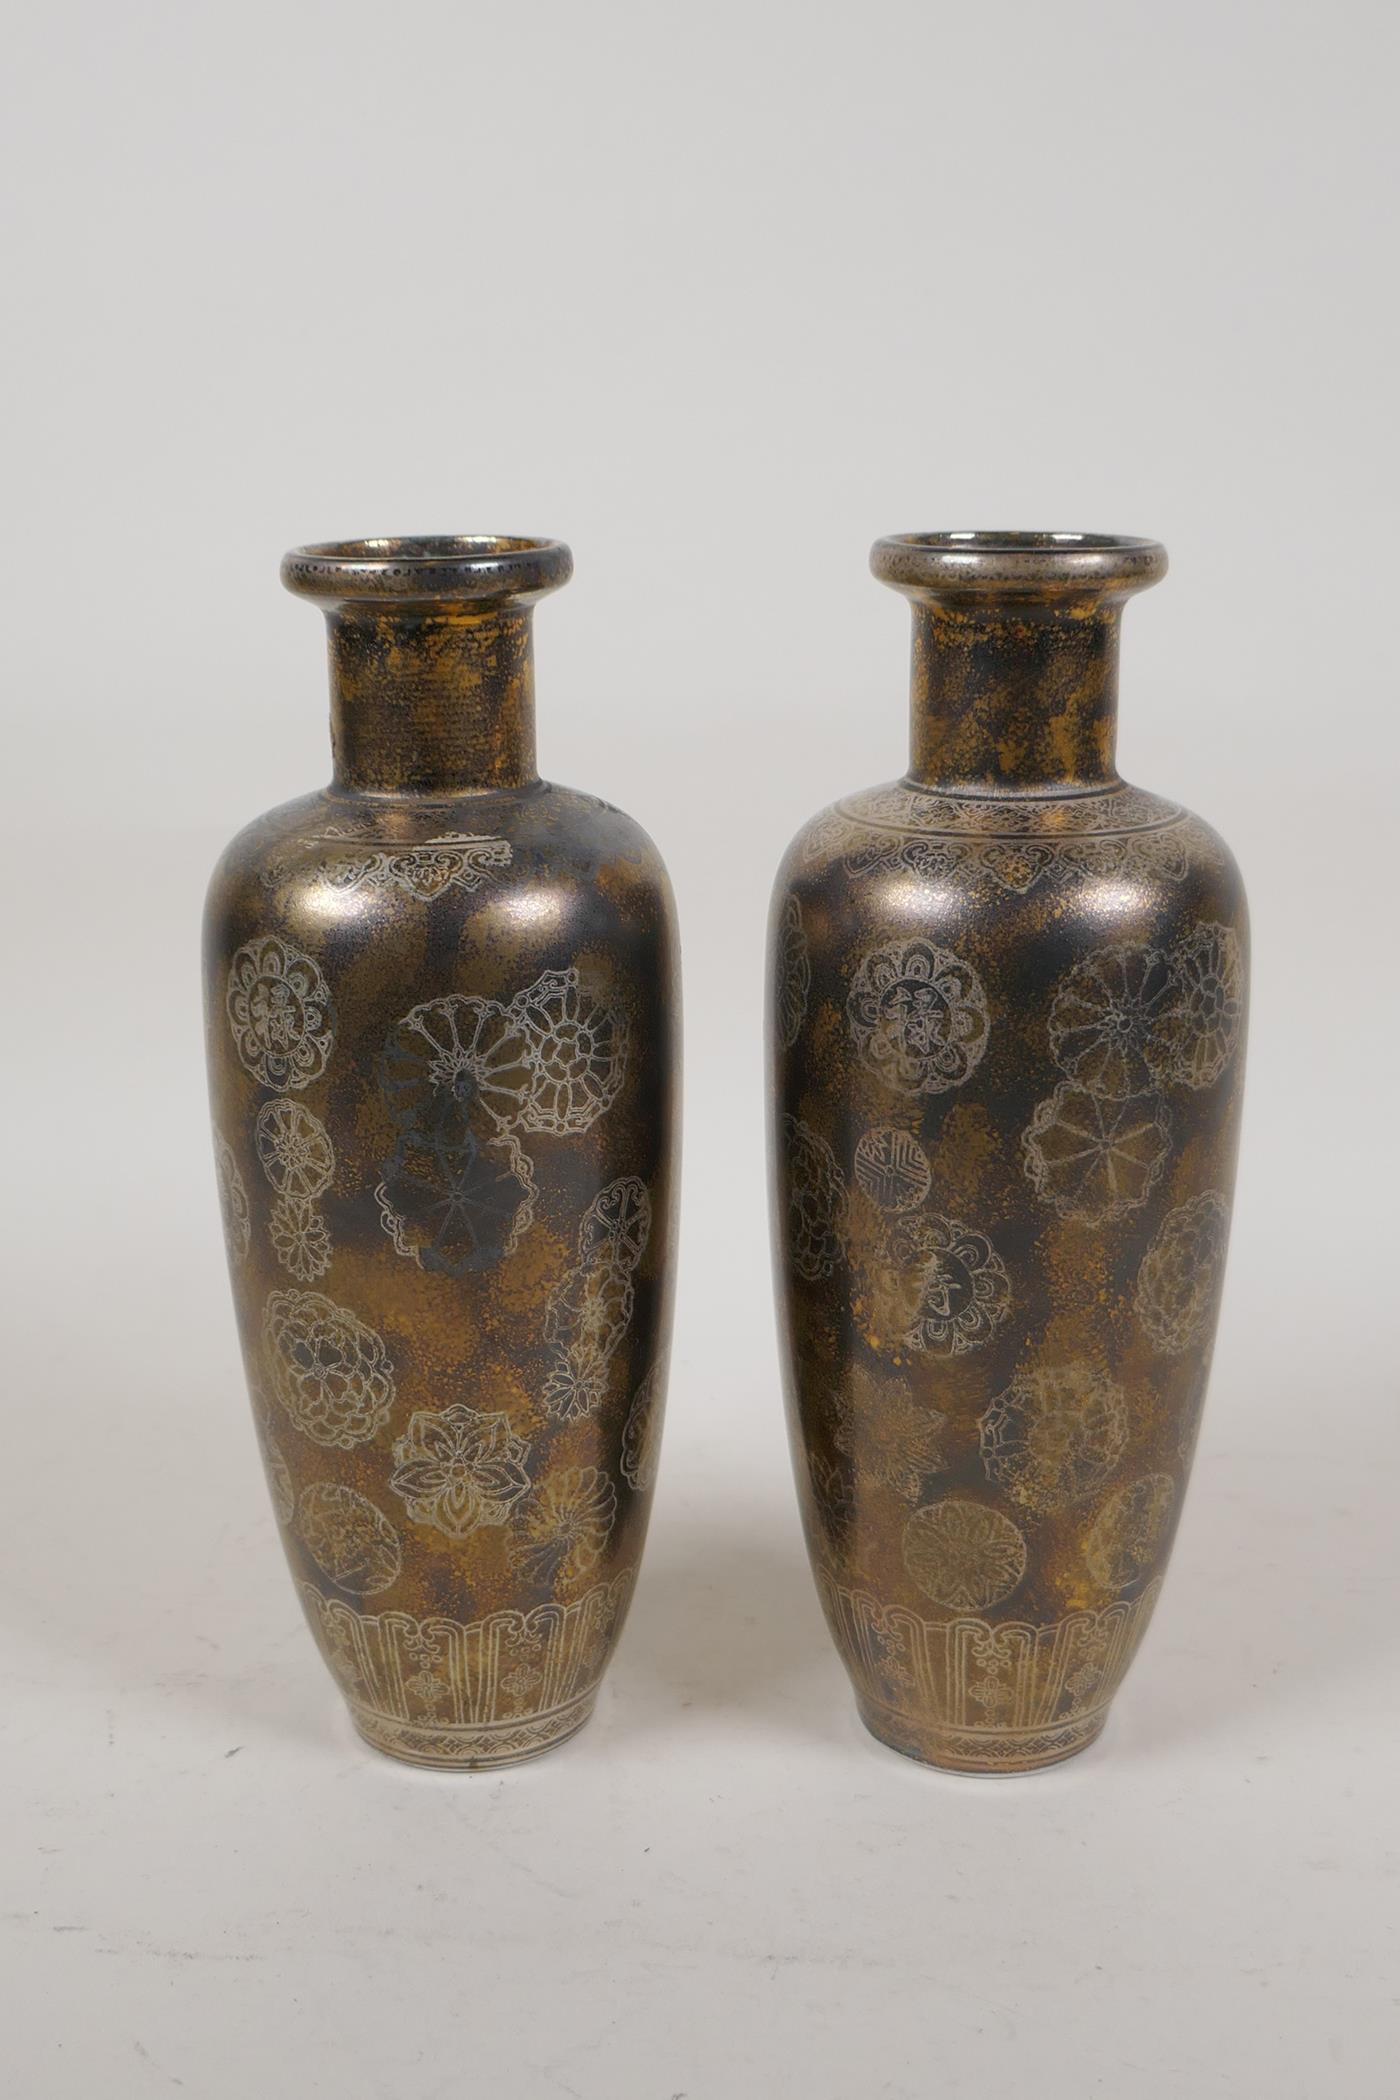 A pair of lustre glazed porcelain vases with floral and character decoration, Chinese 4 character - Image 3 of 4